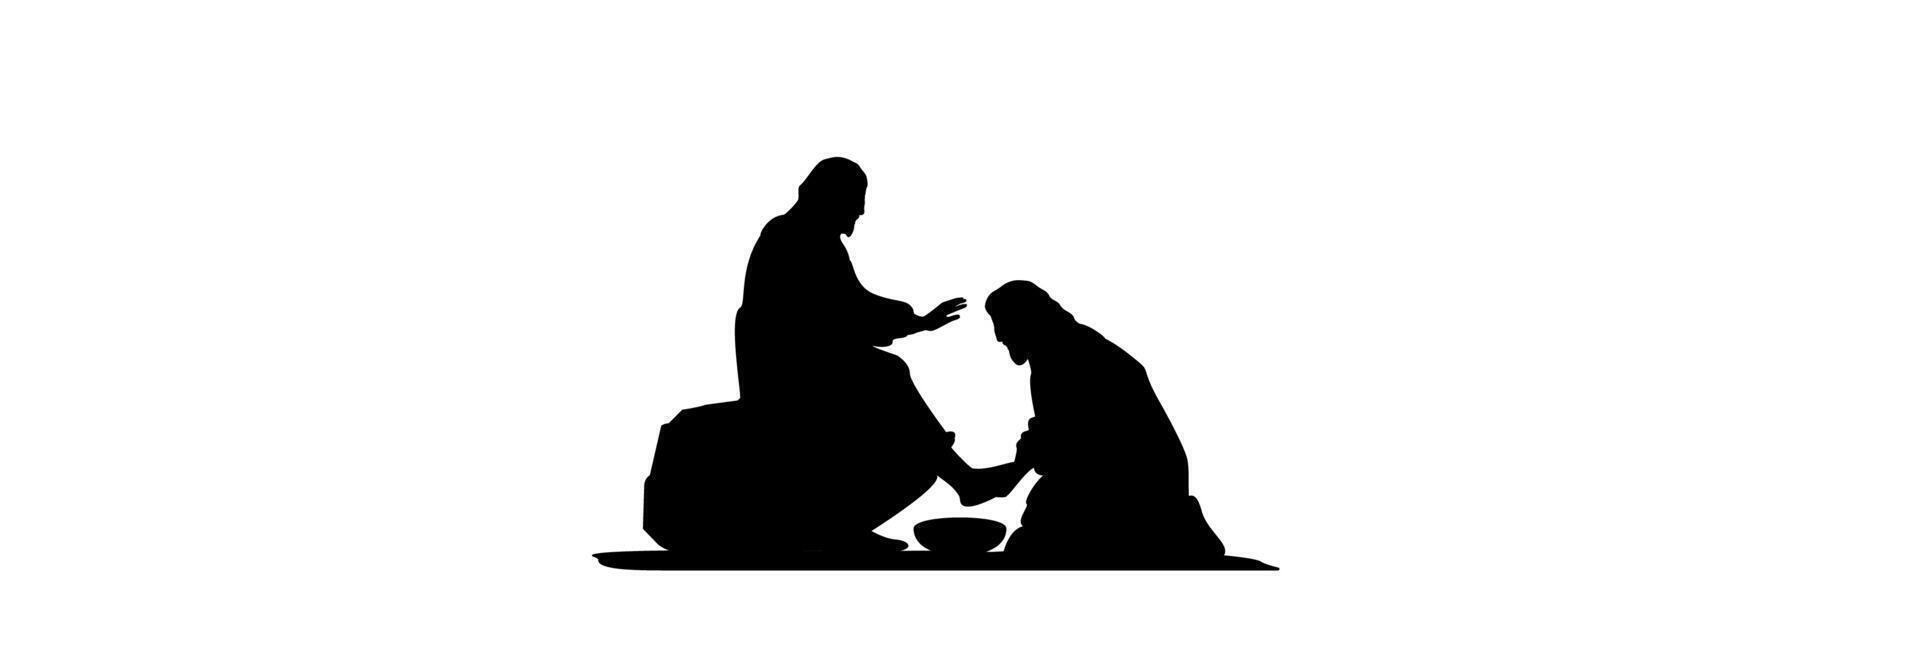 Jesus washes Peter's feet. vector